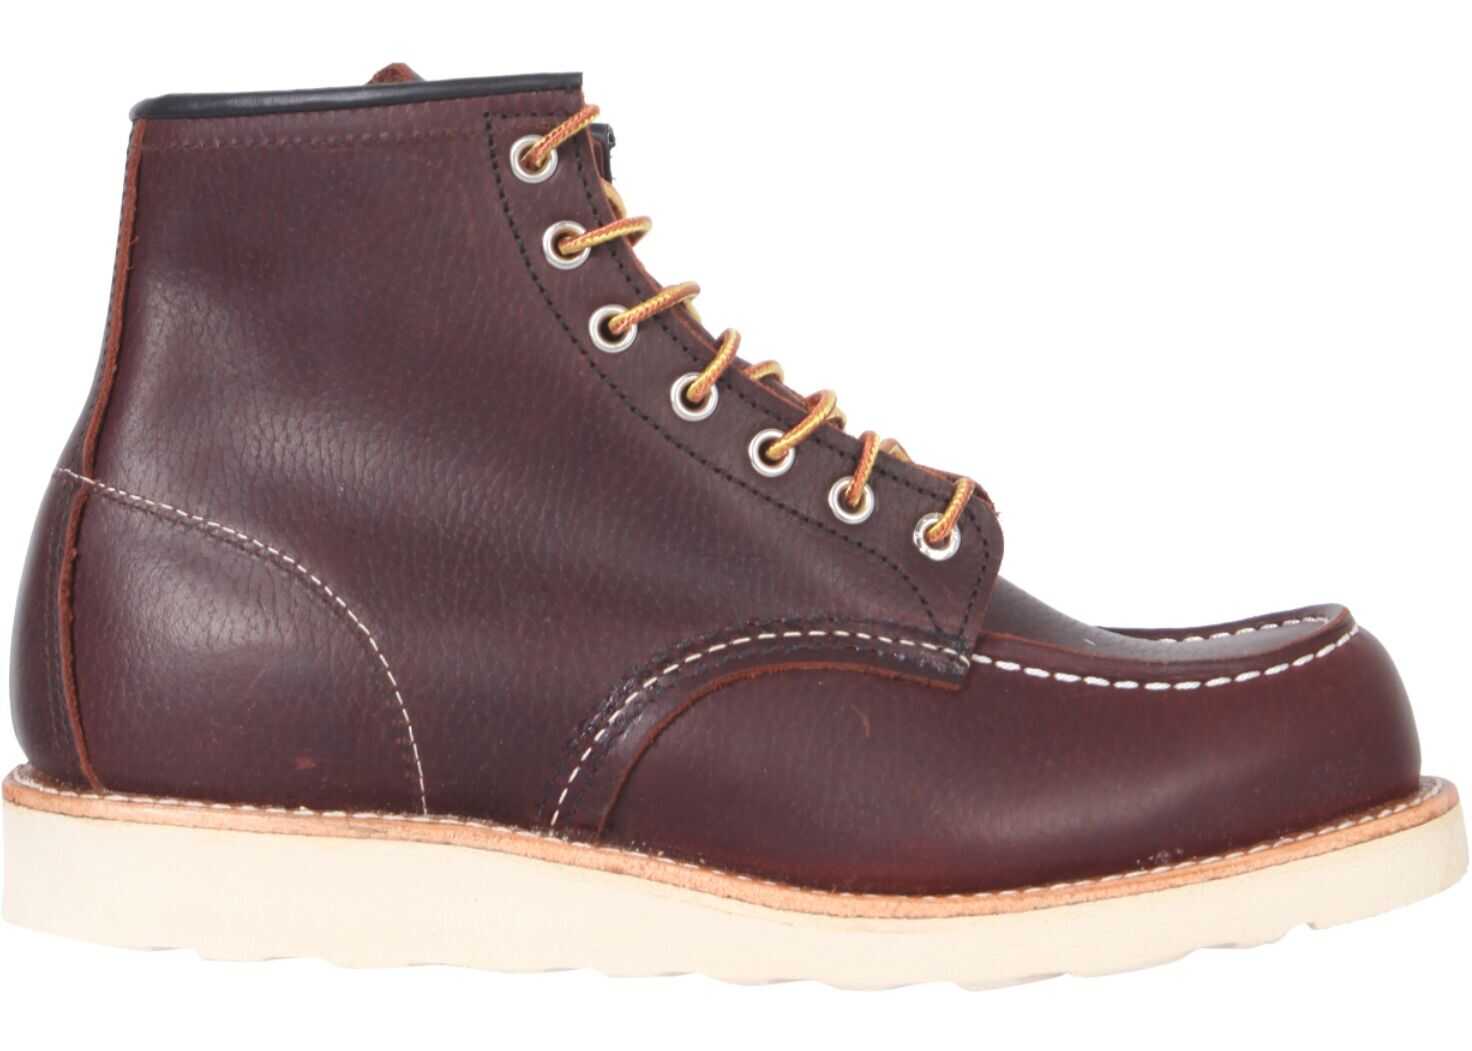 Red Wing Moc Toe Lace-Up Boots 8138_BROWN BROWN